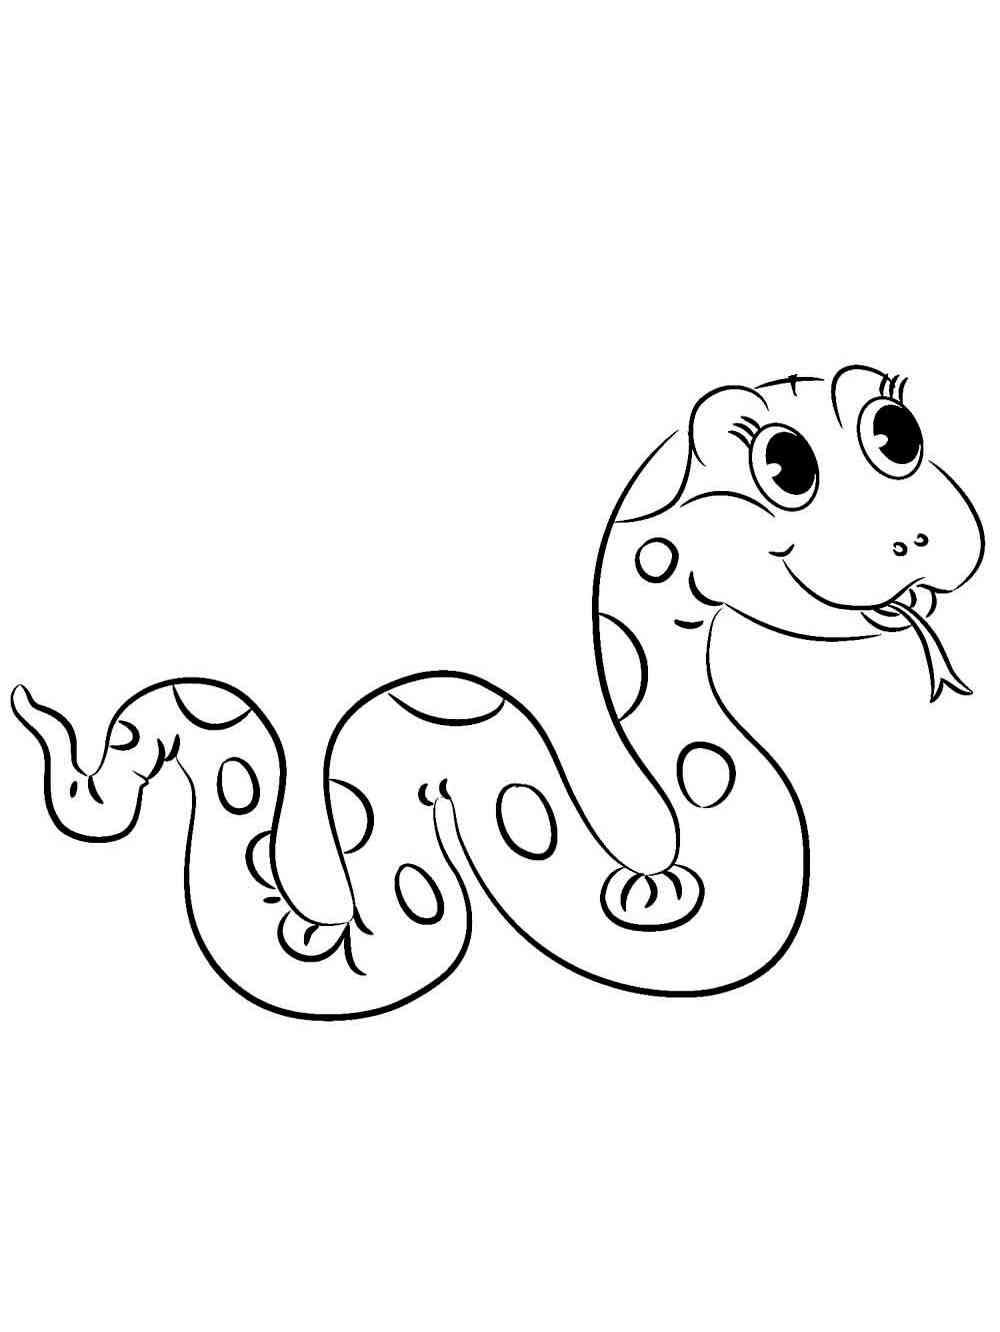 Beautiful Snake coloring page